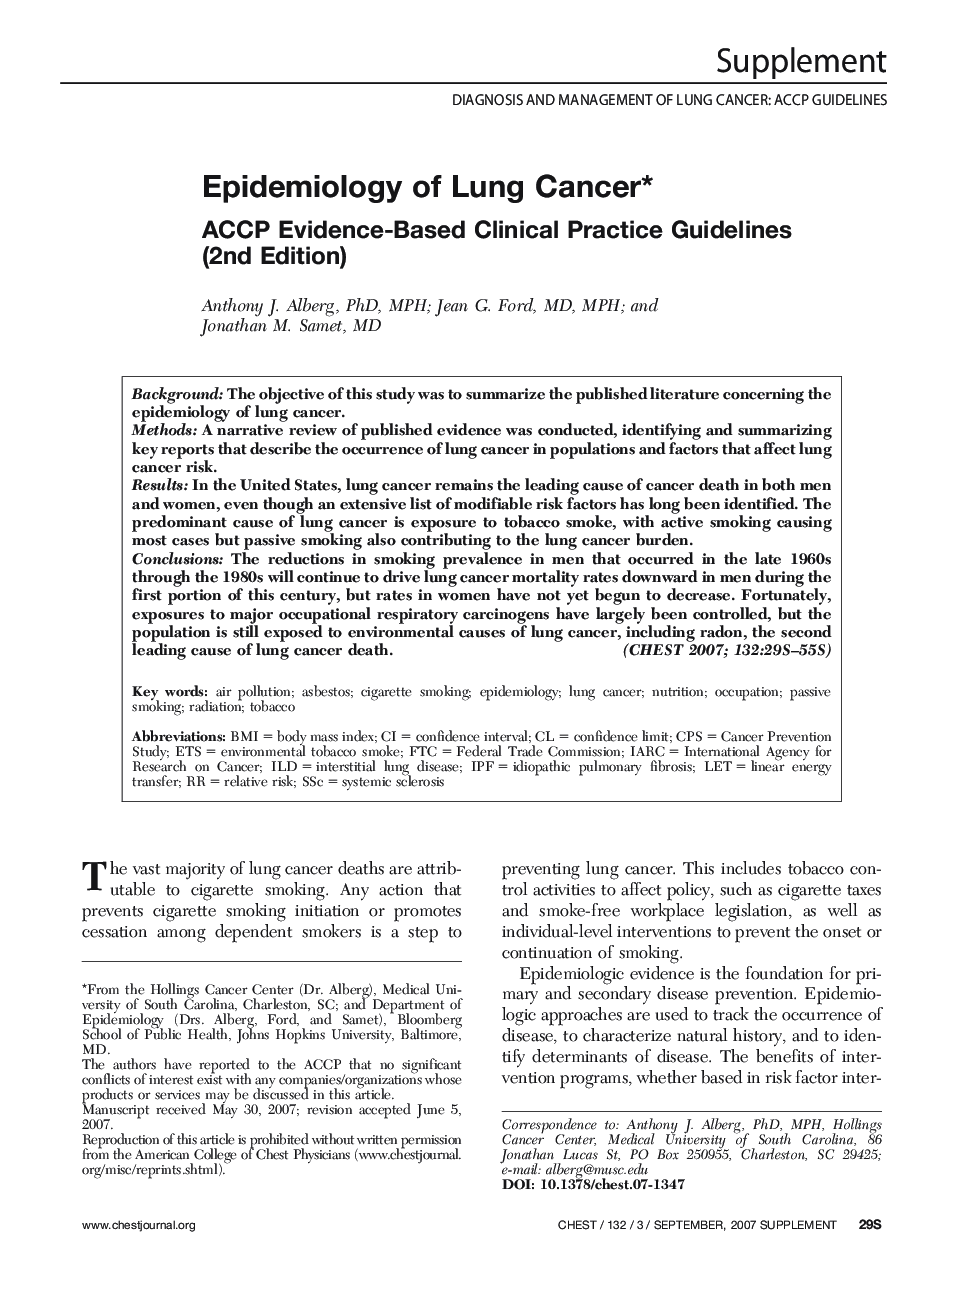 Epidemiology of Lung Cancer